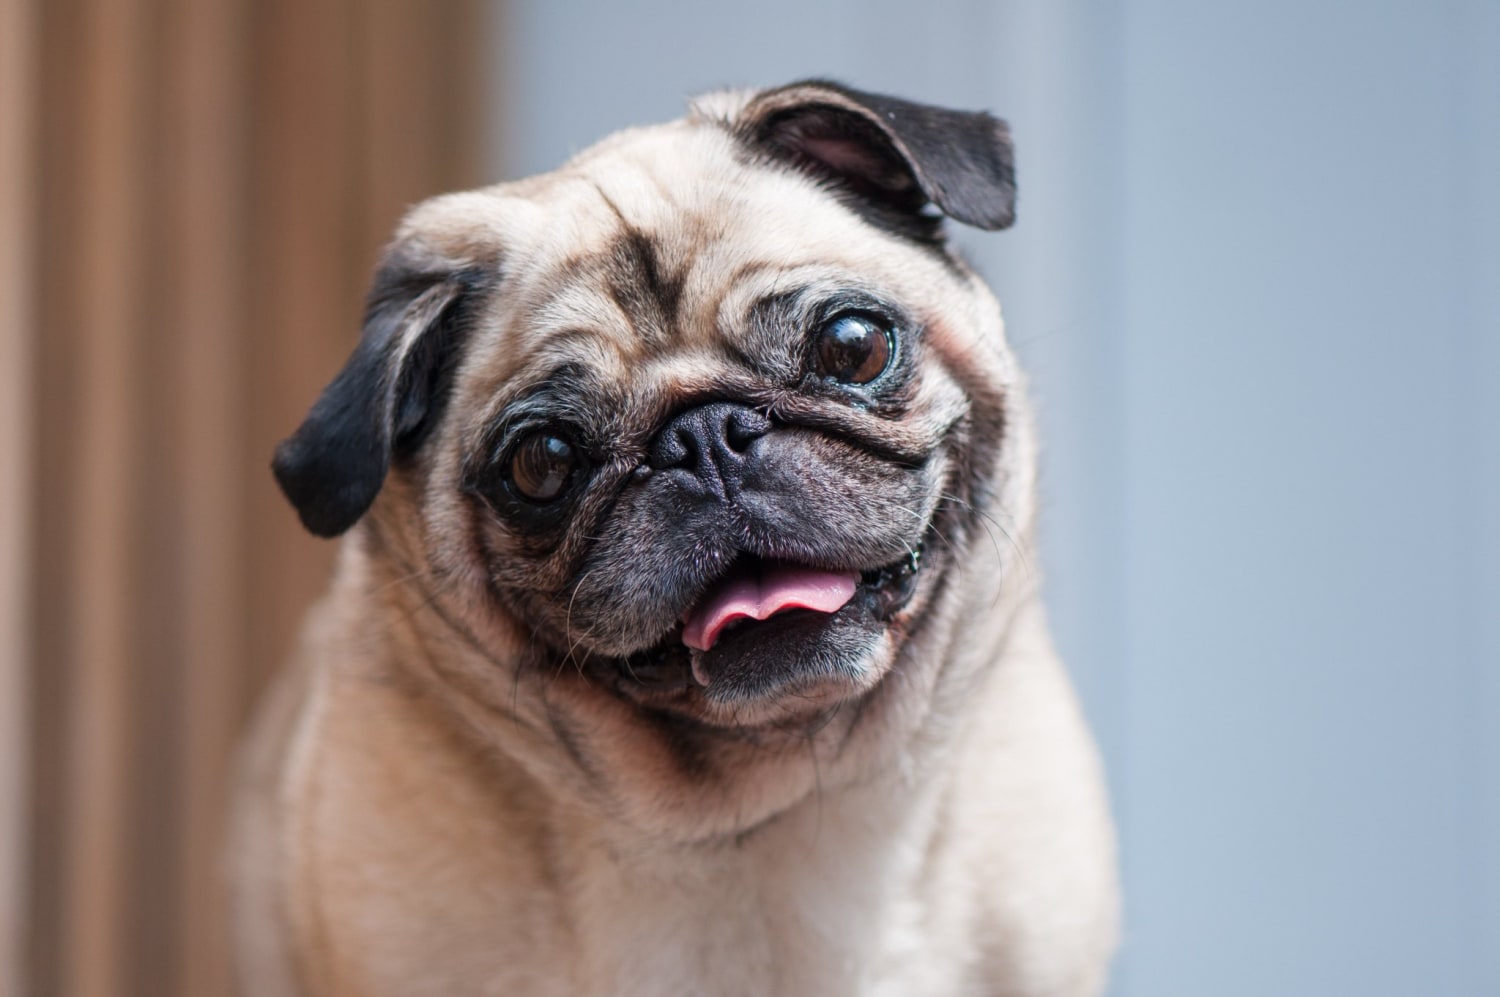 Pugs face such serious health conditions they can "no longer be considered a typical dog from a health perspective," according to Royal Veterinary College researchers